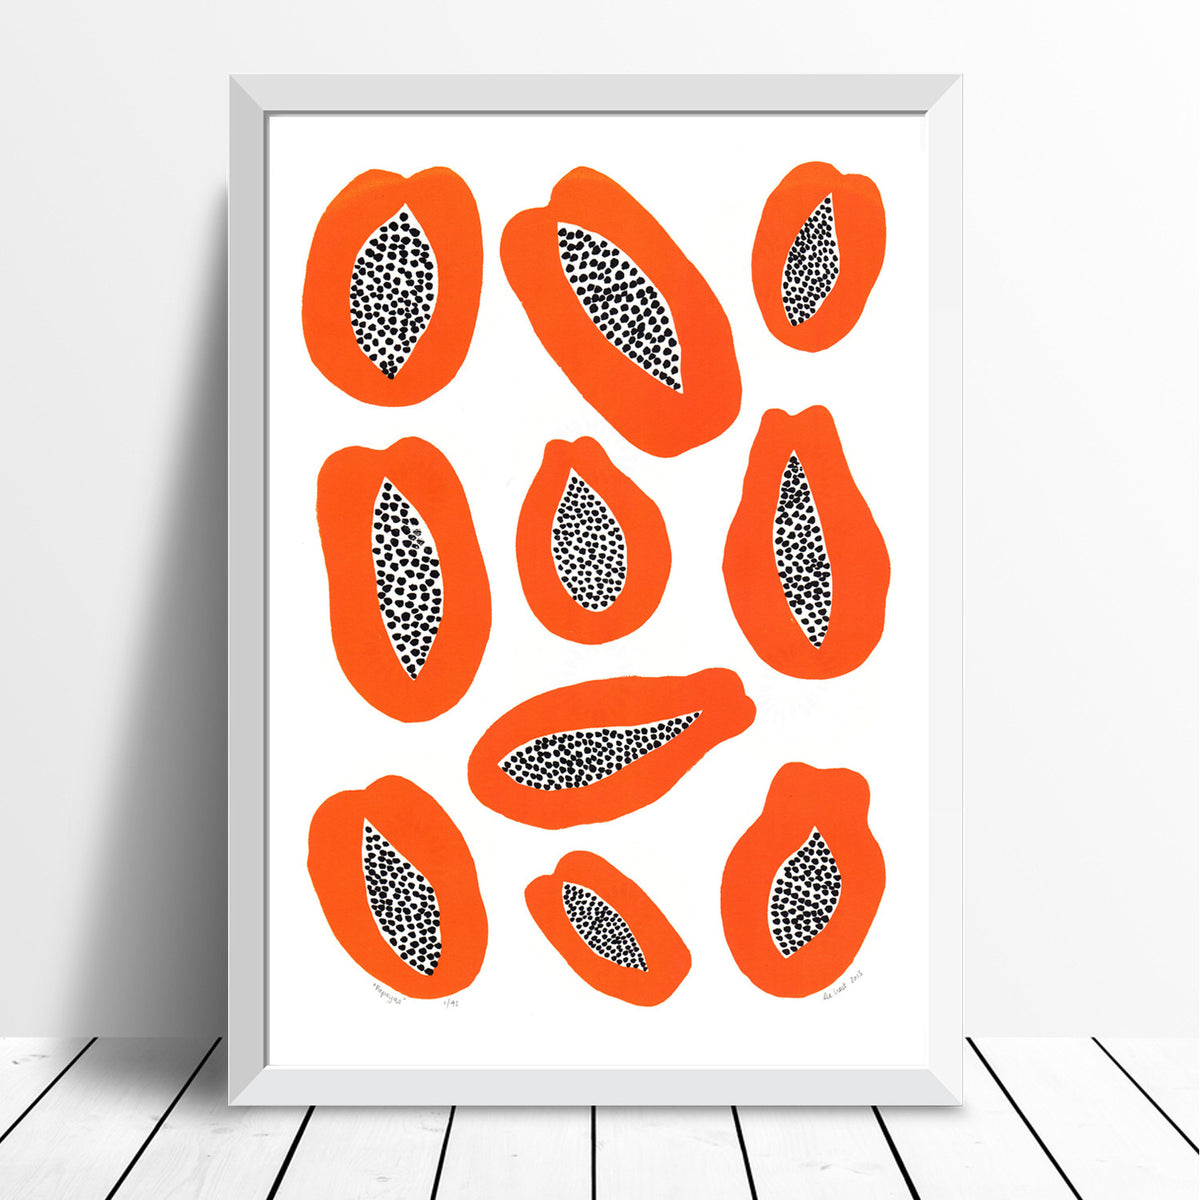 Illustrated Scandinavian style print of juicy Papayas. The simple shapes of the tropical fruit in warm burnt orange creates contrast with the dotty black seeds.